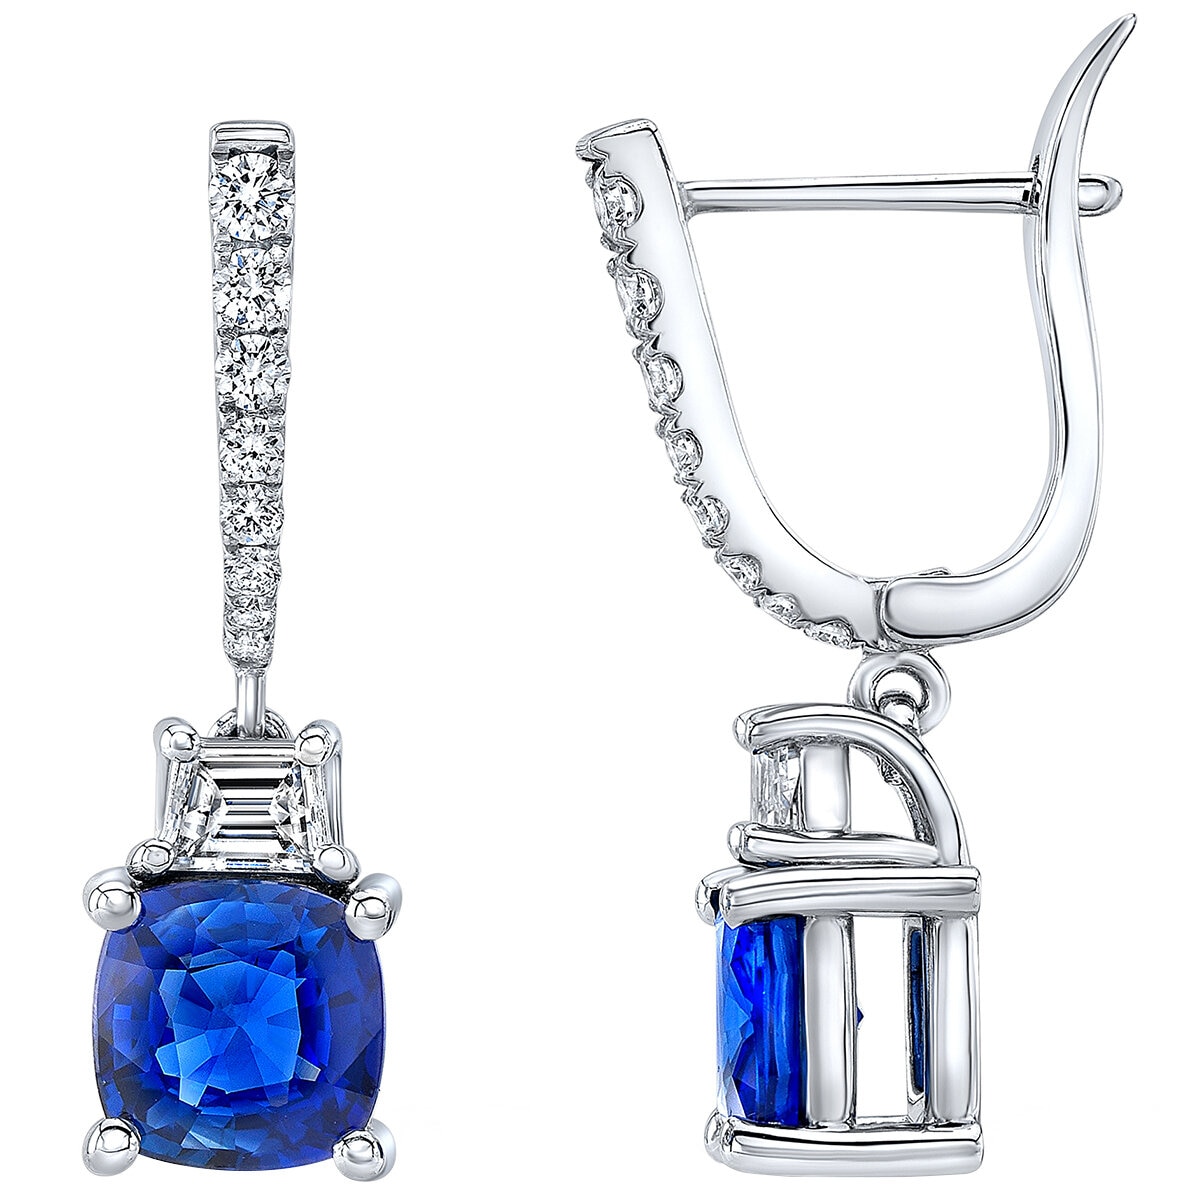 18K White Gold Diamond Earring With Blue Sapphire